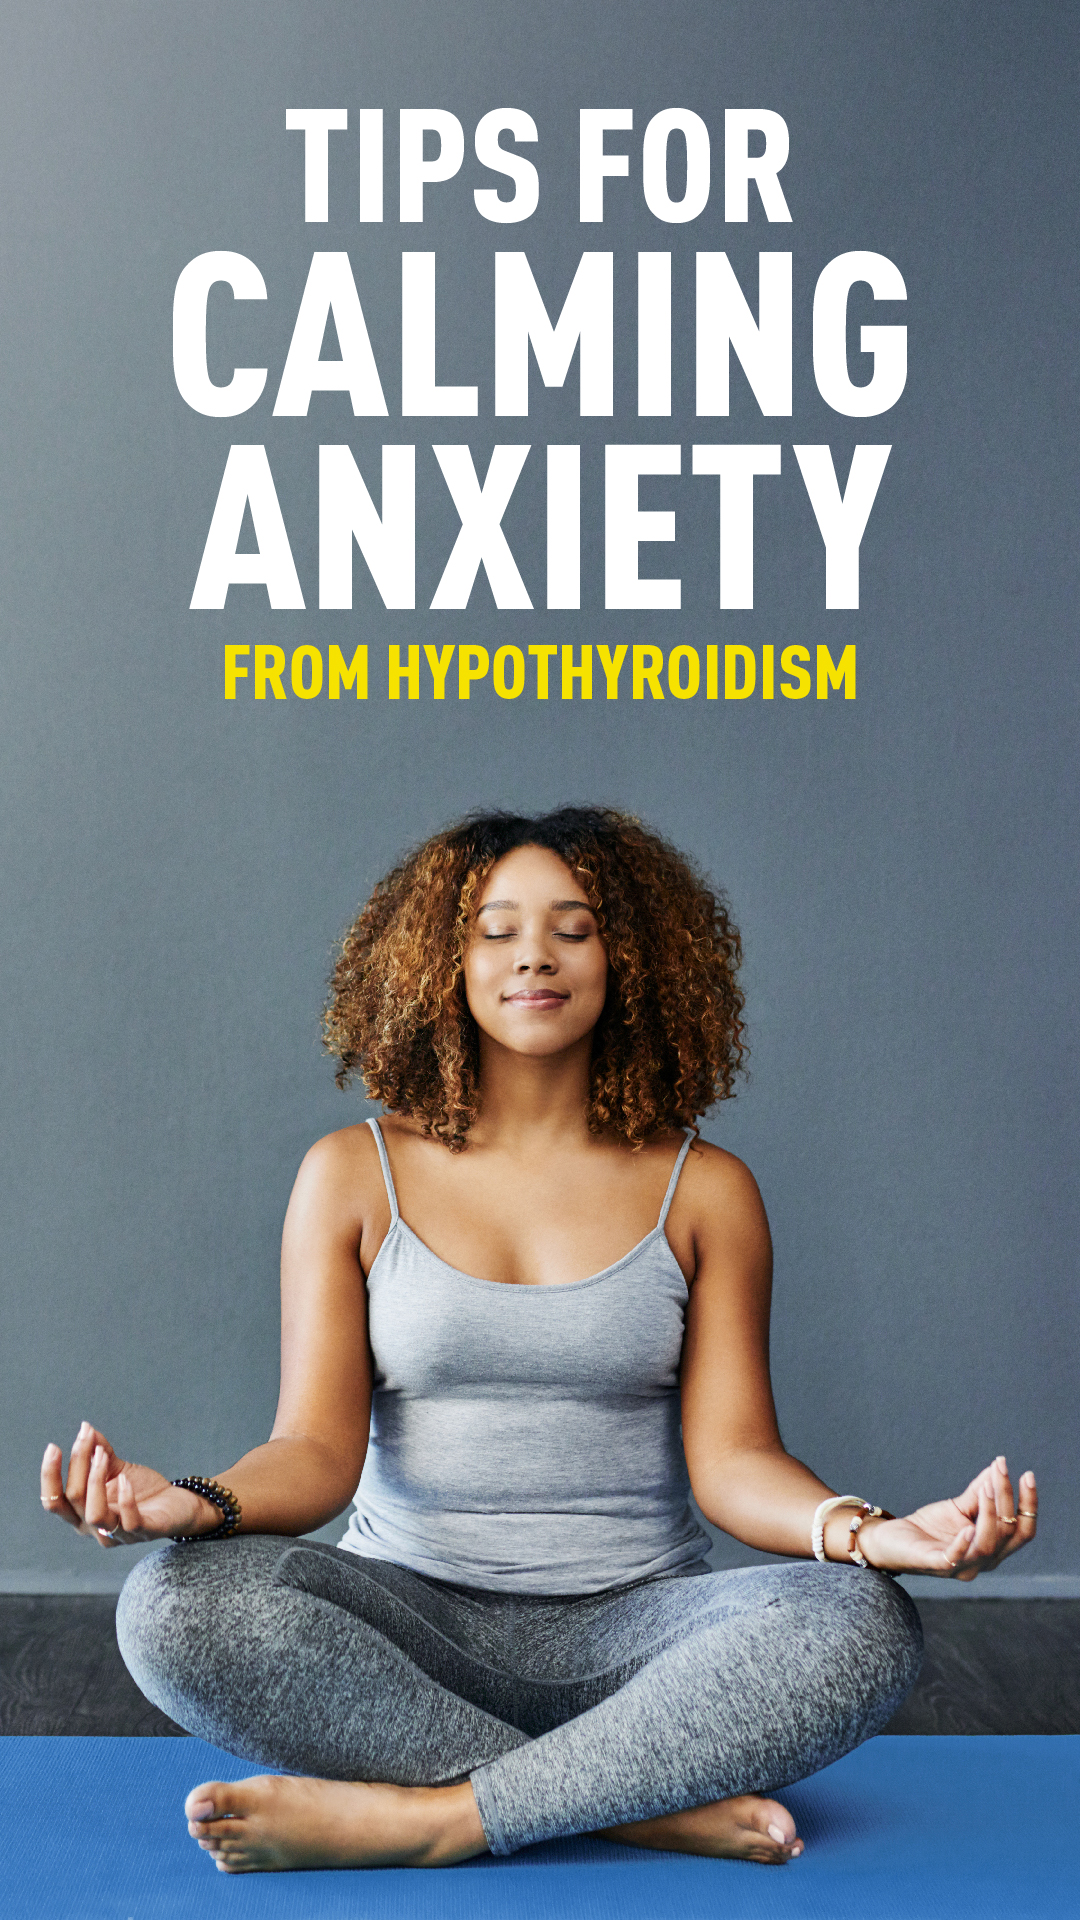 Tips for Calming Anxiety from Hypothyroidism